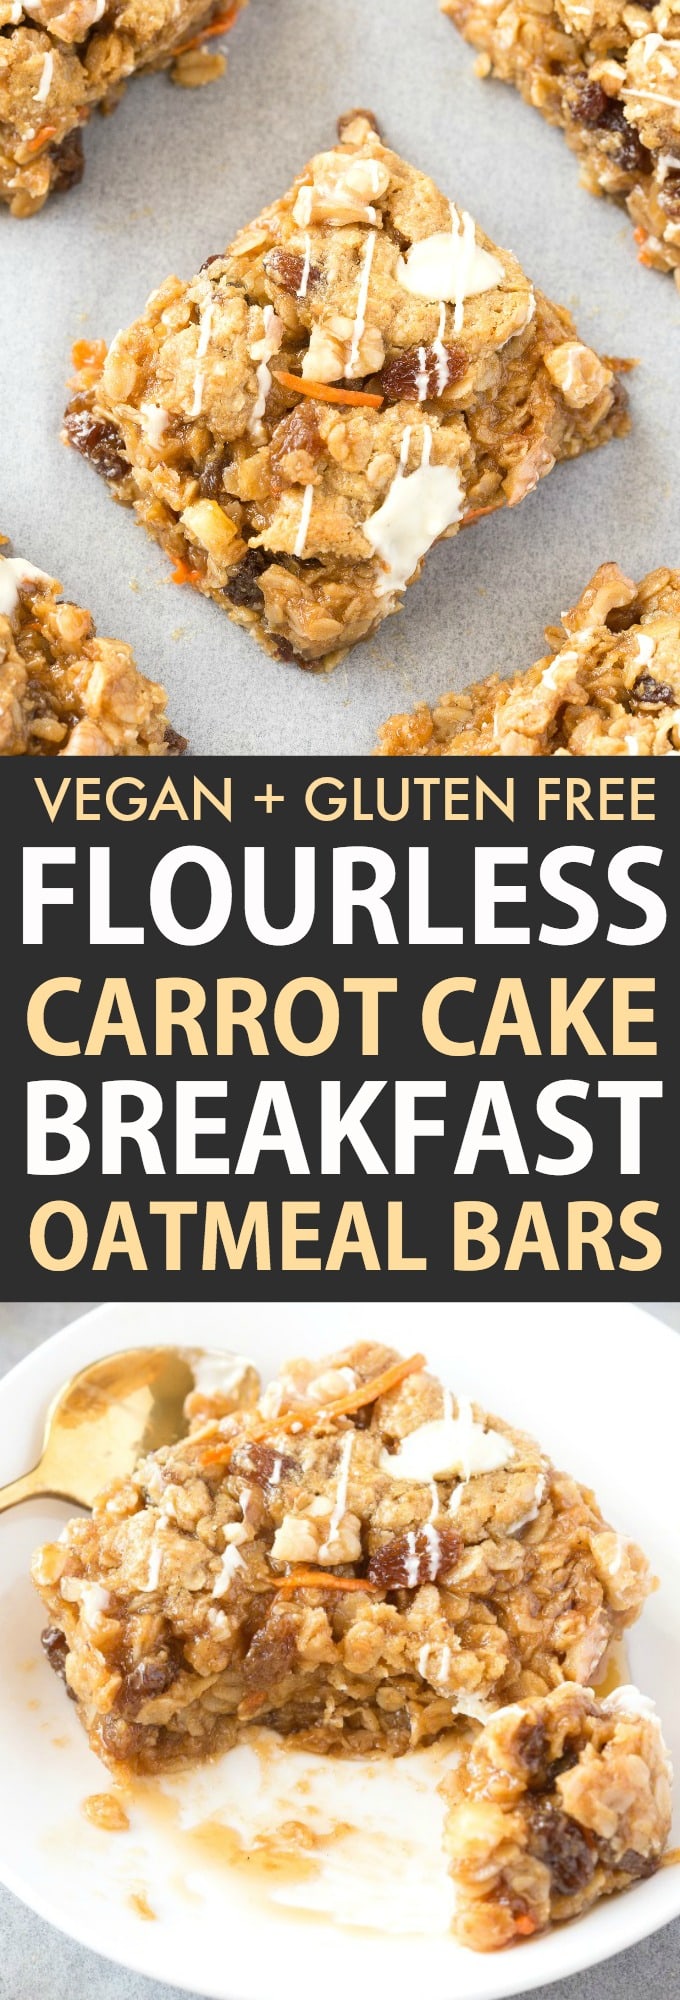 flourless carrot cake baked oatmeal recipe topped with a vegan cream cheese